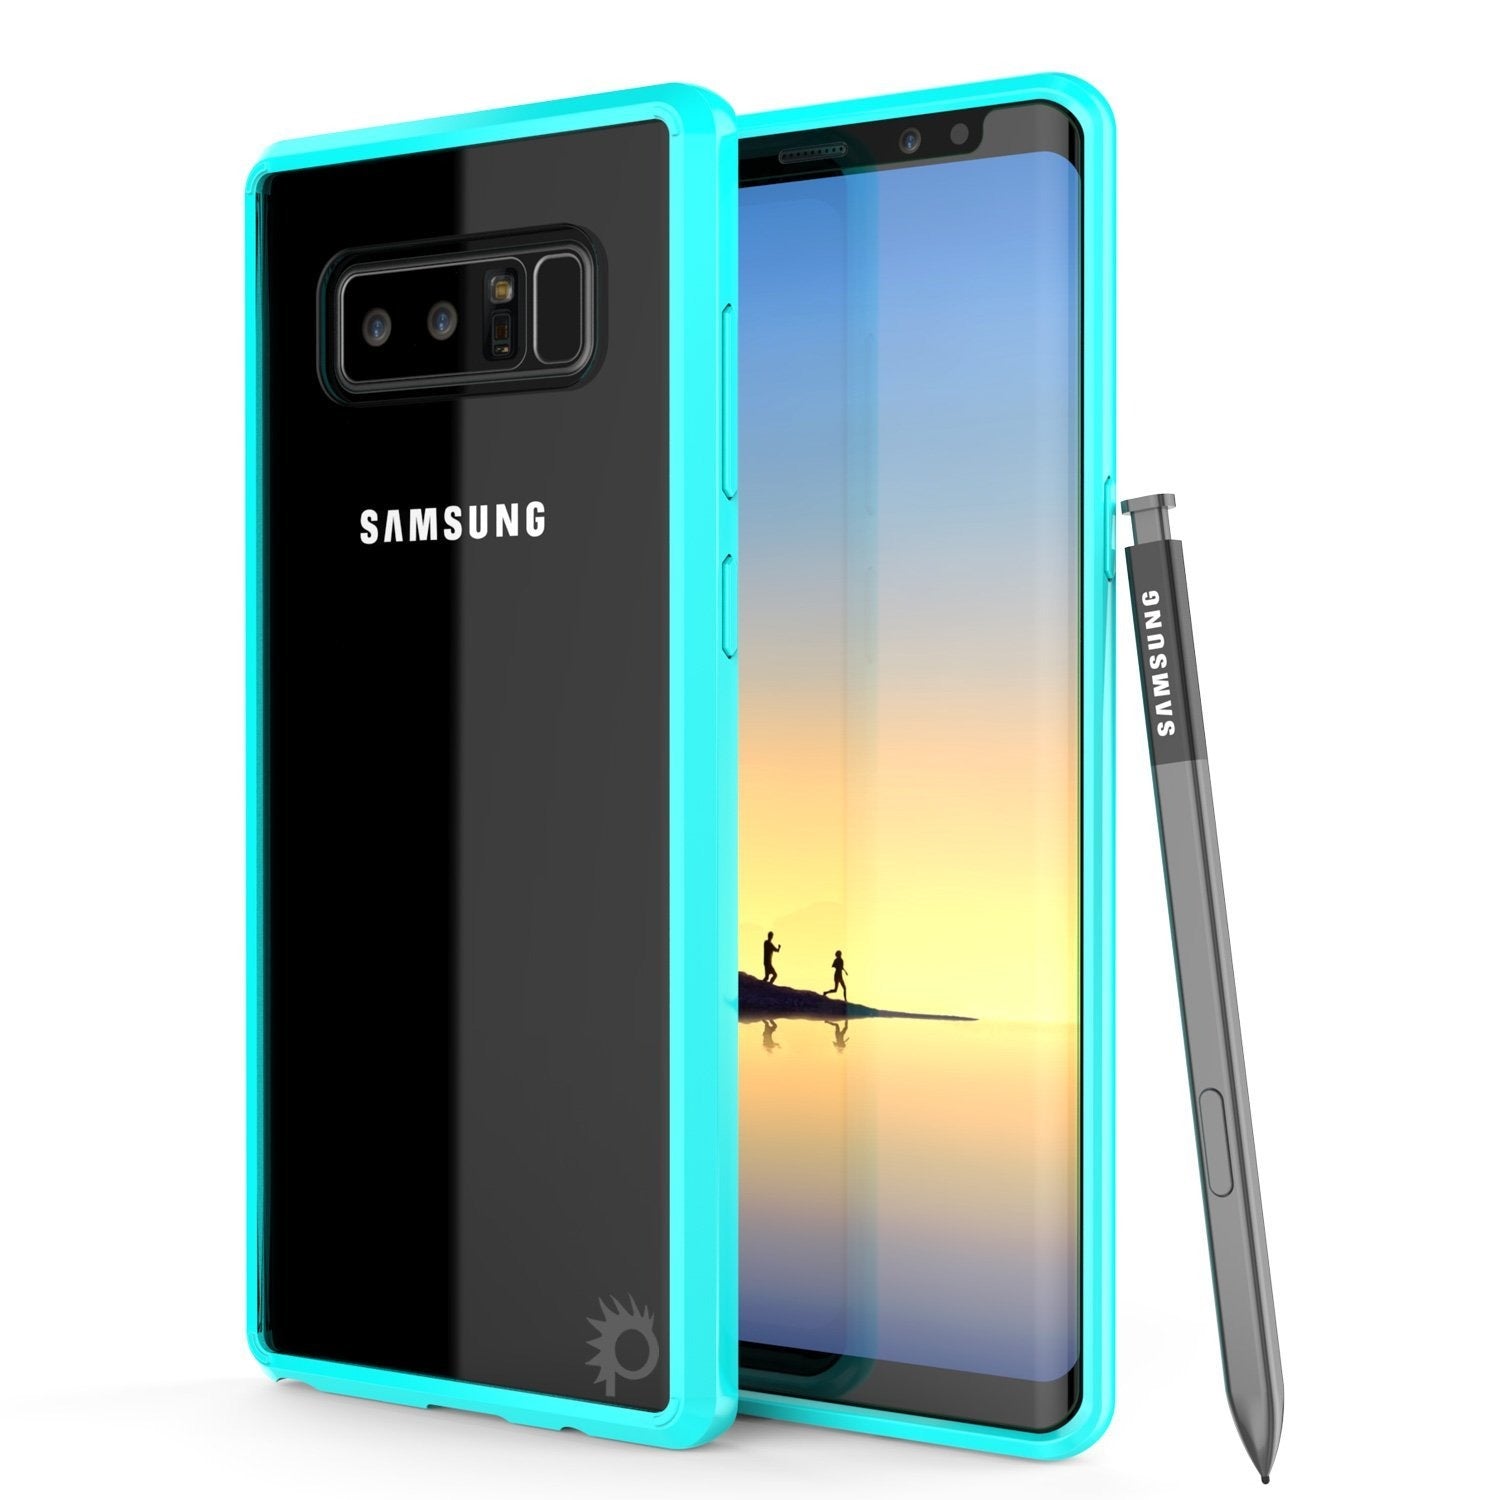 Galaxy Note 8 Case, PUNKcase [LUCID 2.0 Series] [Slim Fit] Armor Cover w/Integrated Anti-Shock System & PUNKSHIELD Screen Protector [Teal] - PunkCase NZ